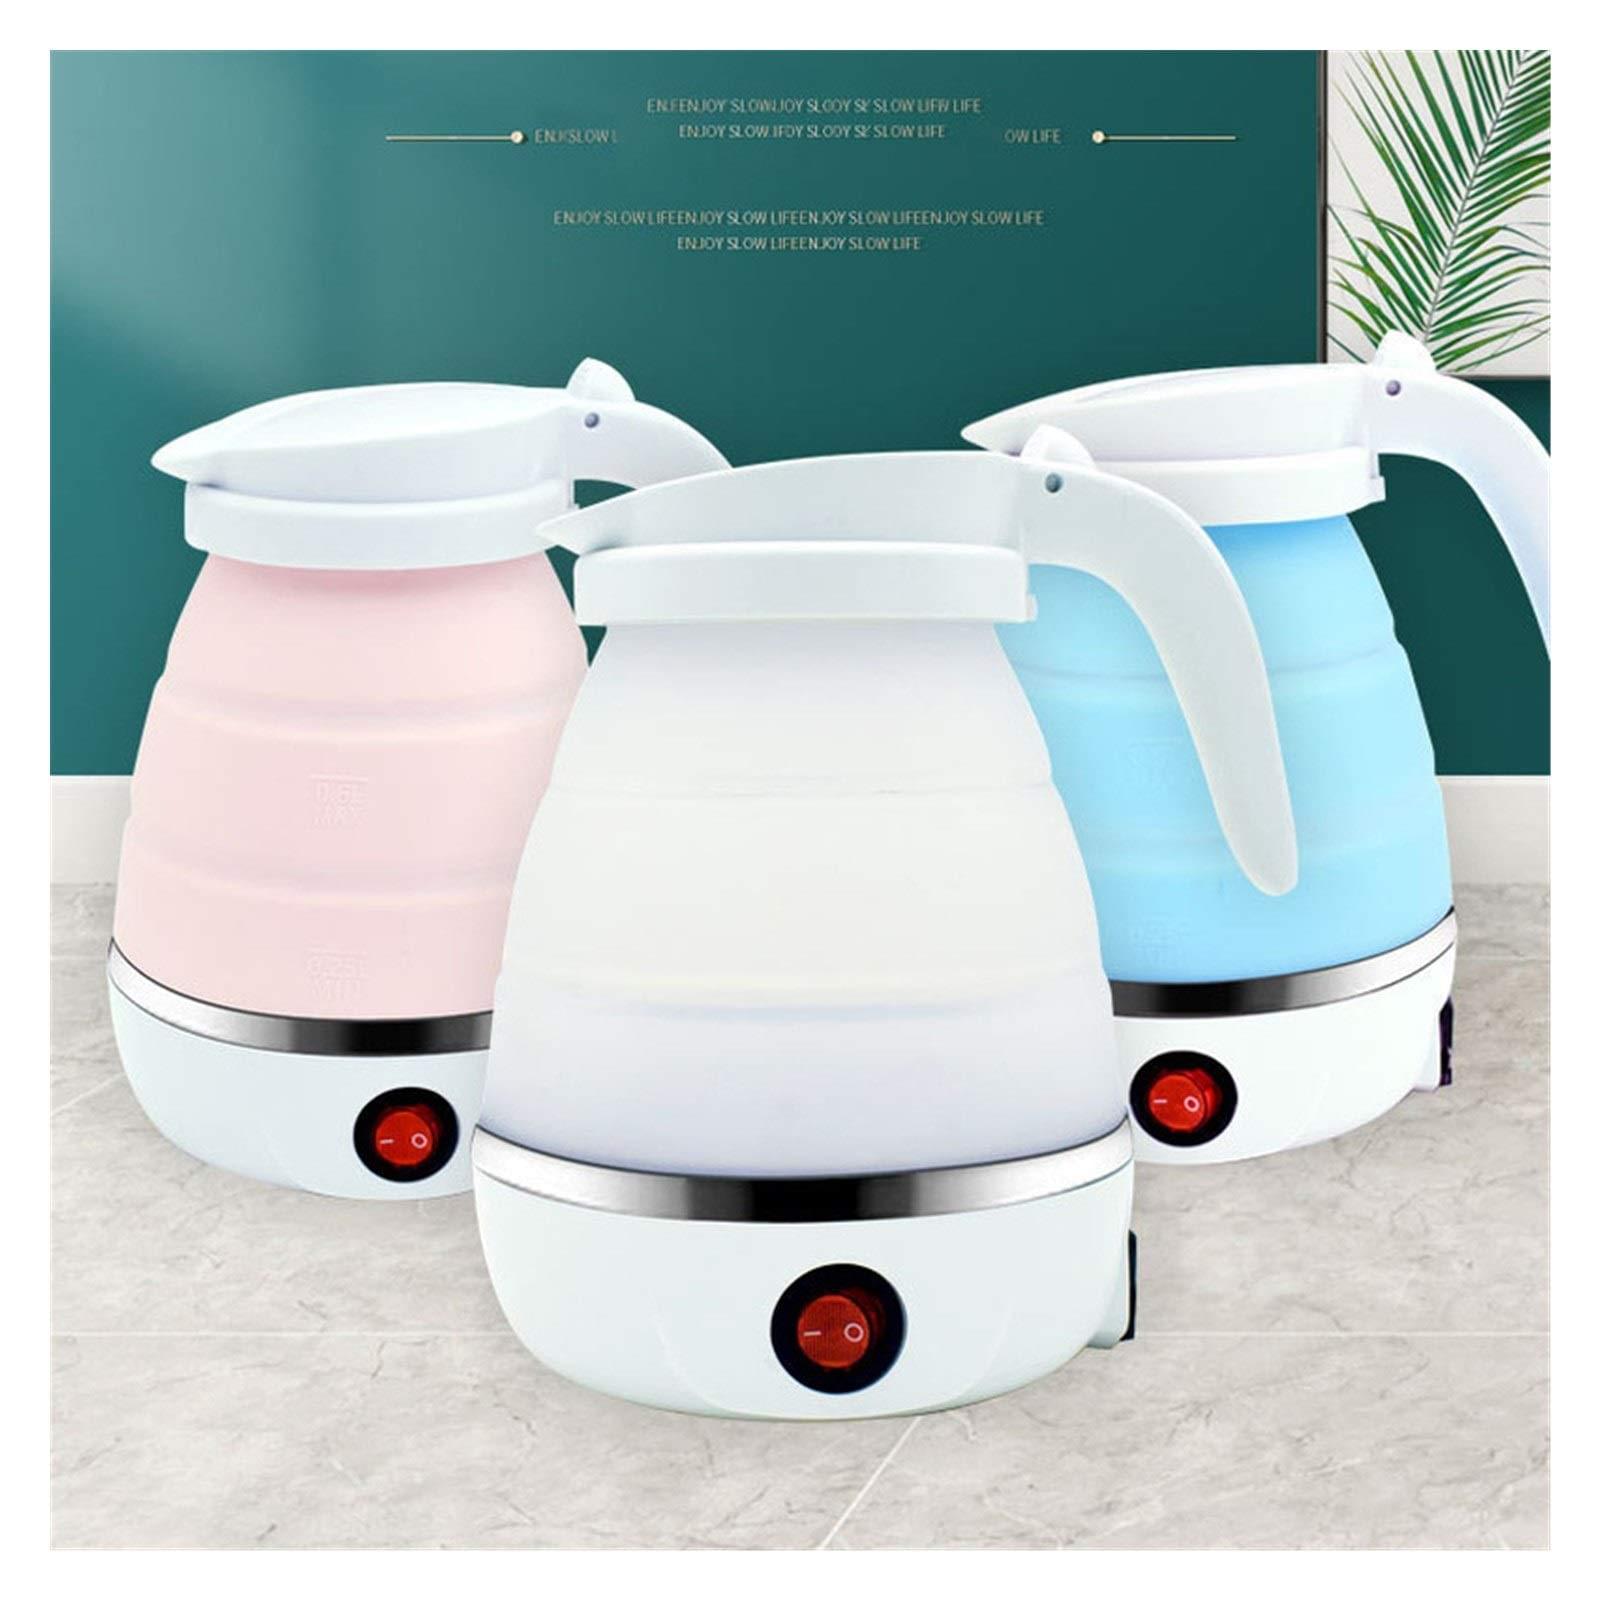 600ML-Portable Electric Kettle | Electronic Kettle | Kettle & Cord | Travelling Kettle